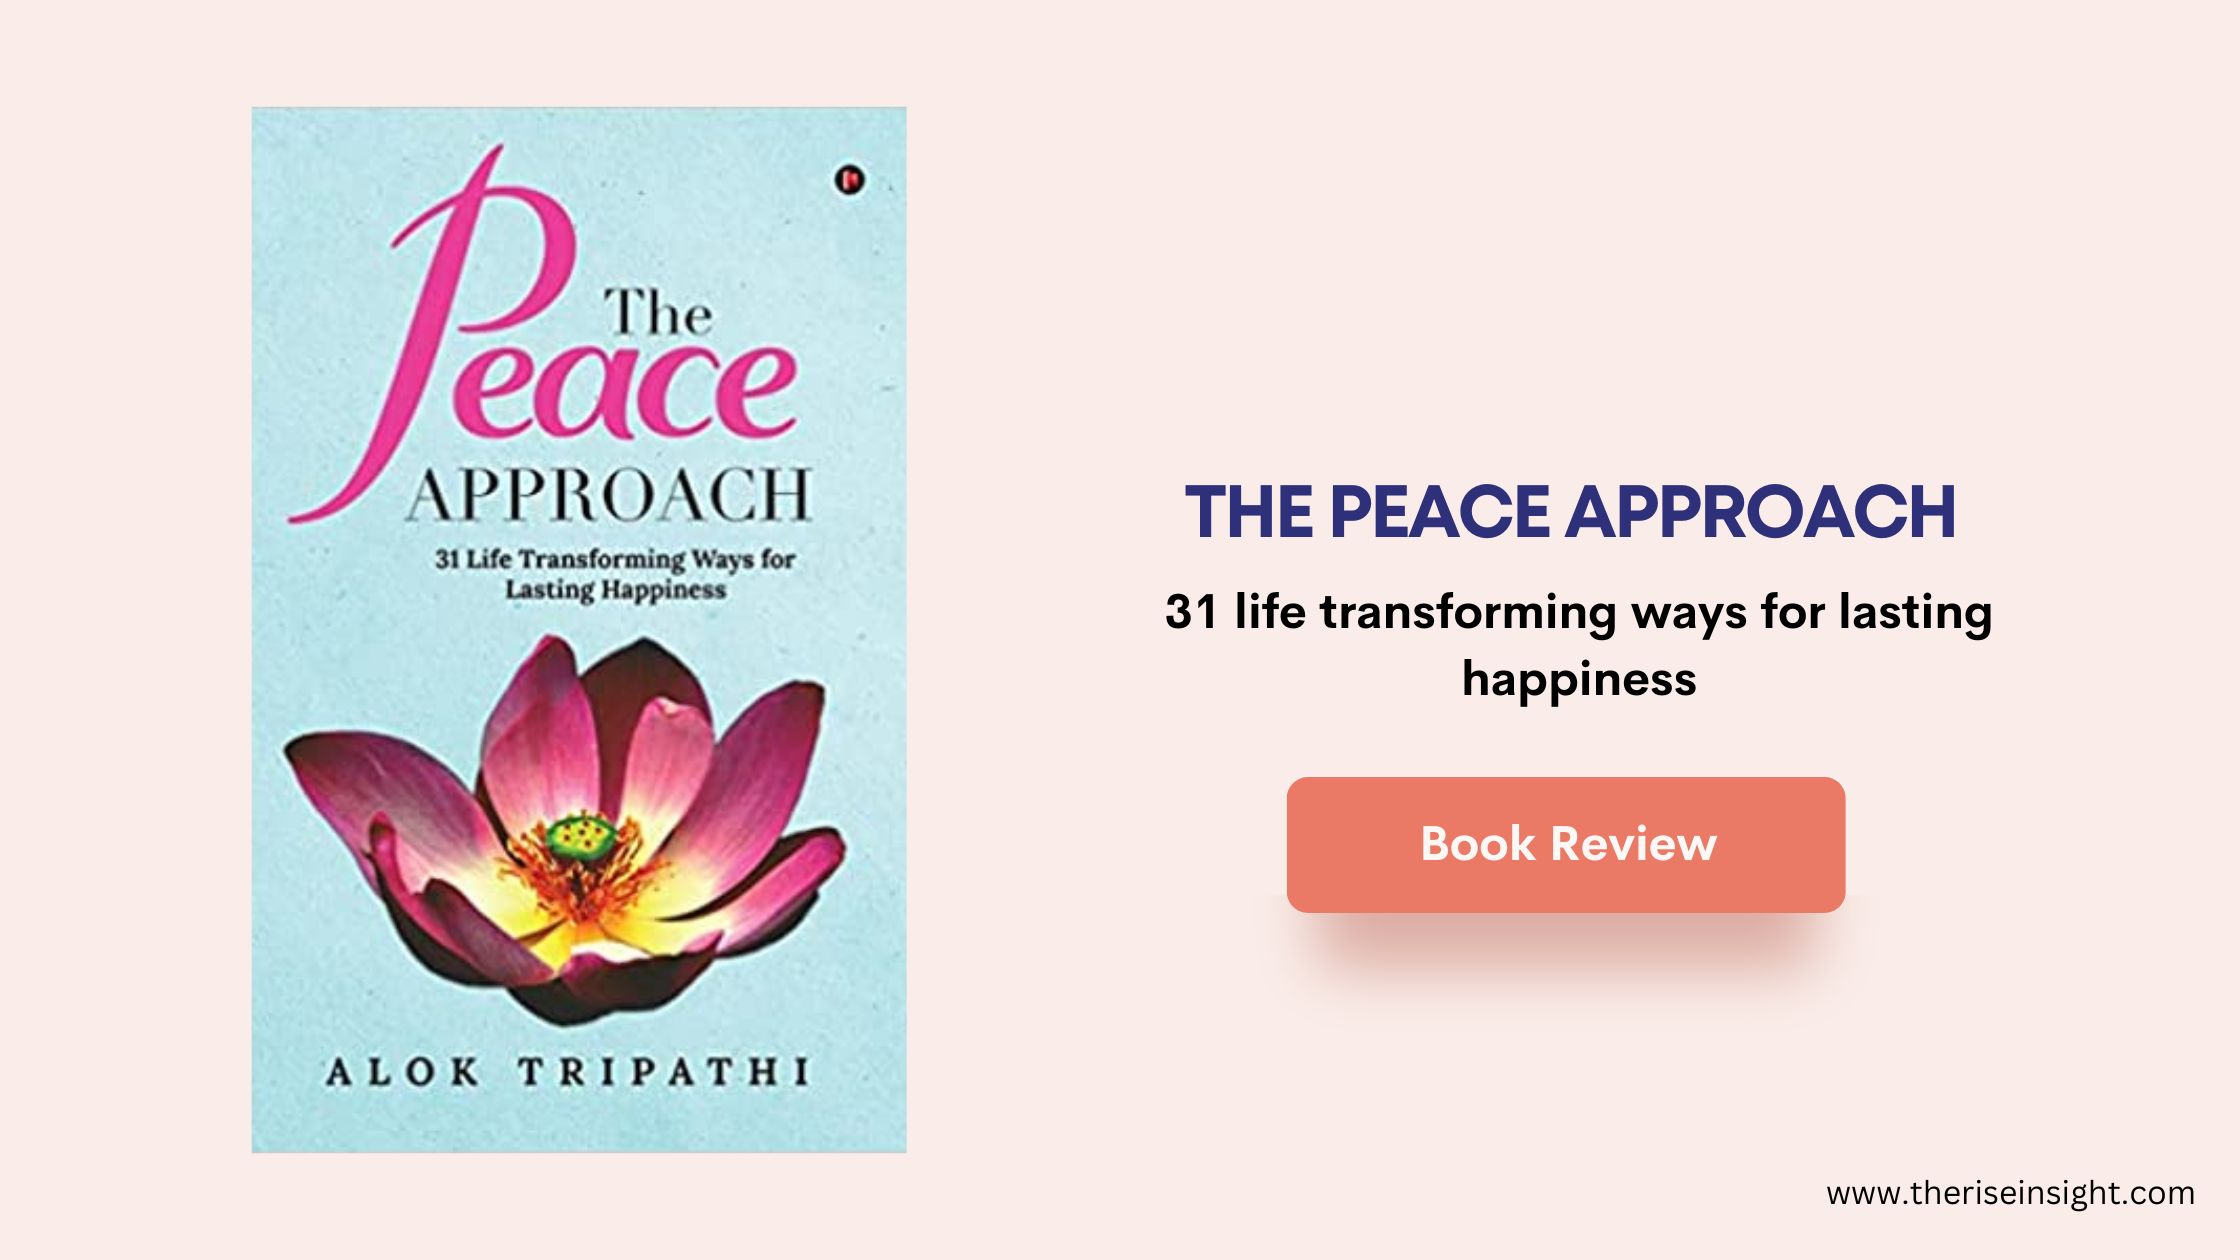 Book Review: “The Peace Approach: 31 Life Transforming Ways for Lasting Happiness” by Alok Tripathi